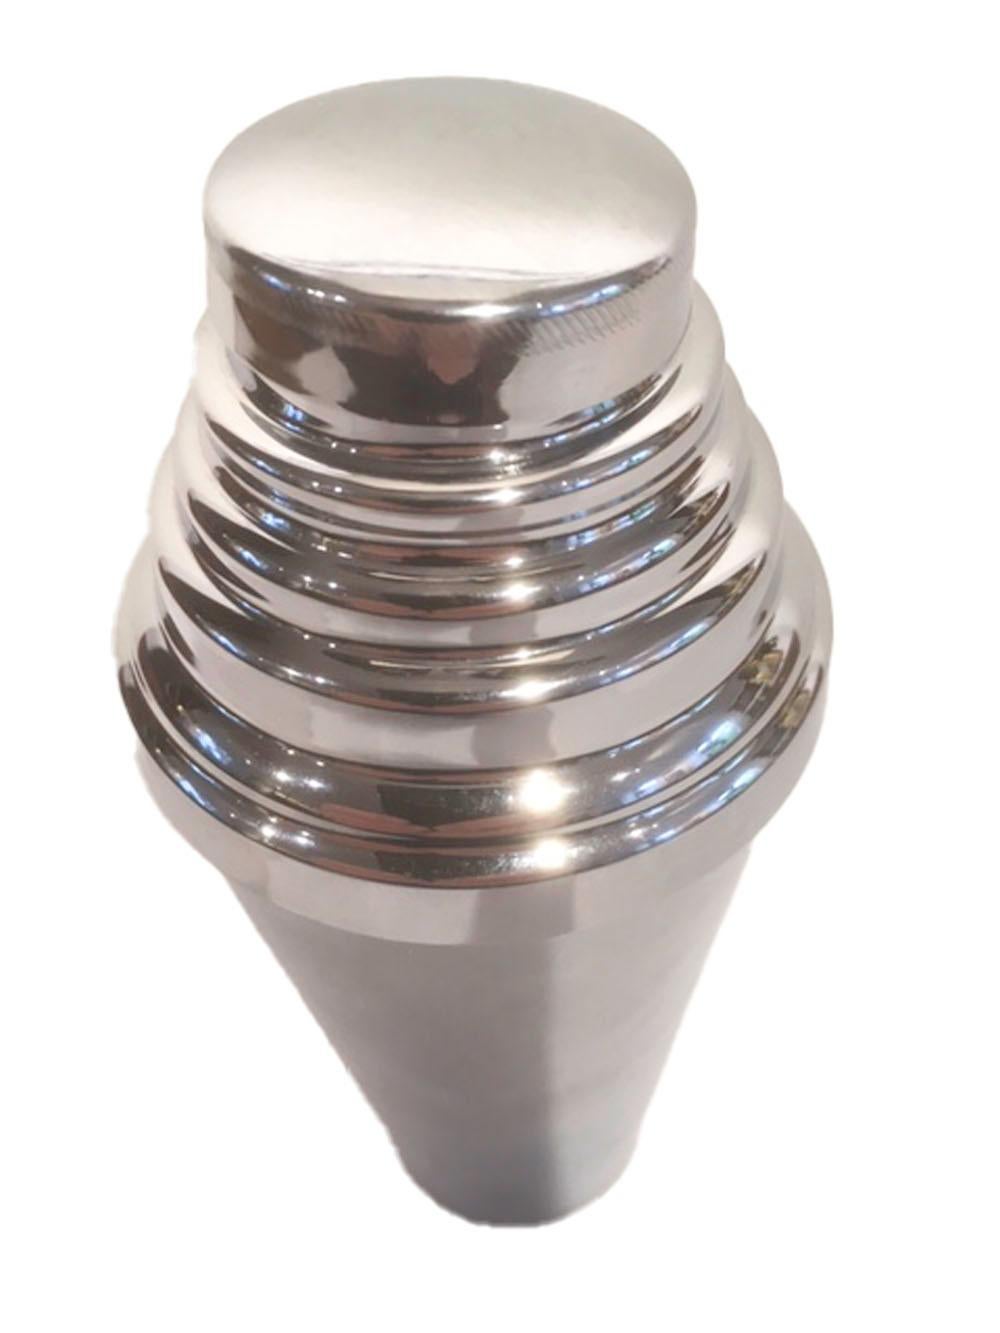 Sleek vintage chrome cocktail shaker by Glo-Hill with a slightly tapered body topped by a stepped lid. The lid is double-walled with fitting the inside and the other over hanging the outside of the base, the lid is topped with a built-in strainer